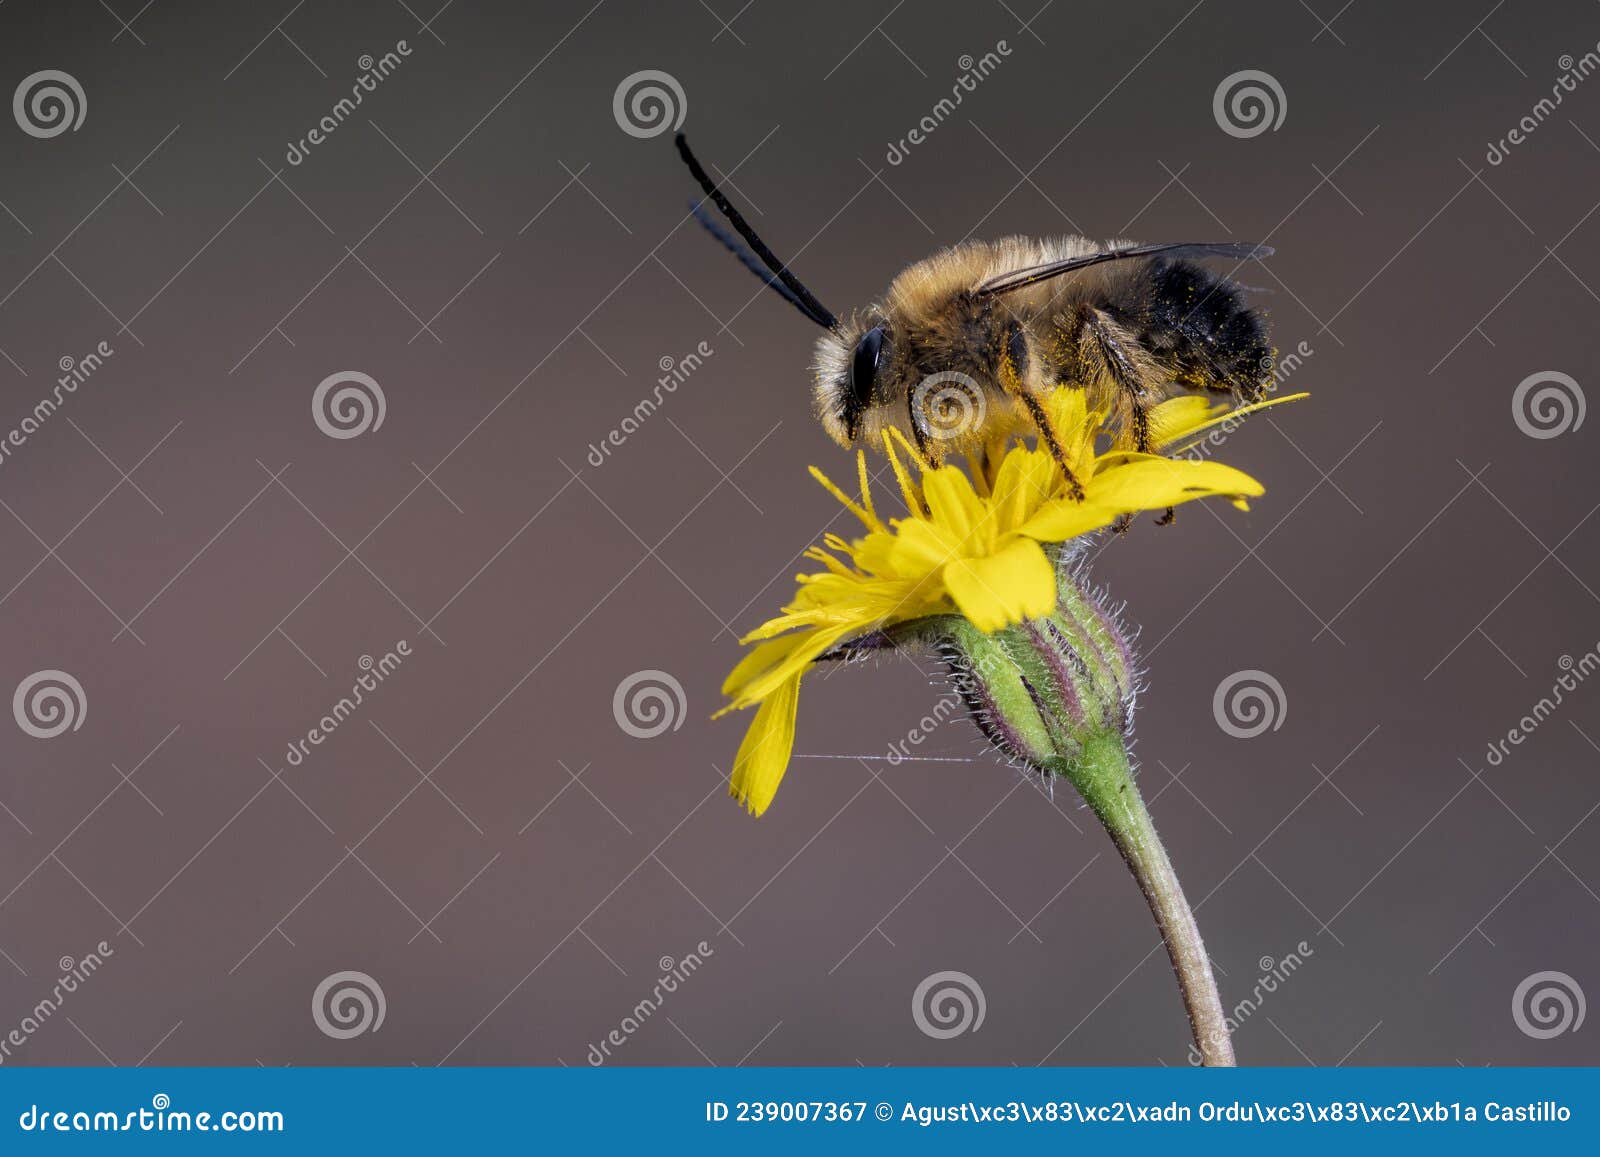 eucera is a genus of bees in the family apidae subfamily apinae.